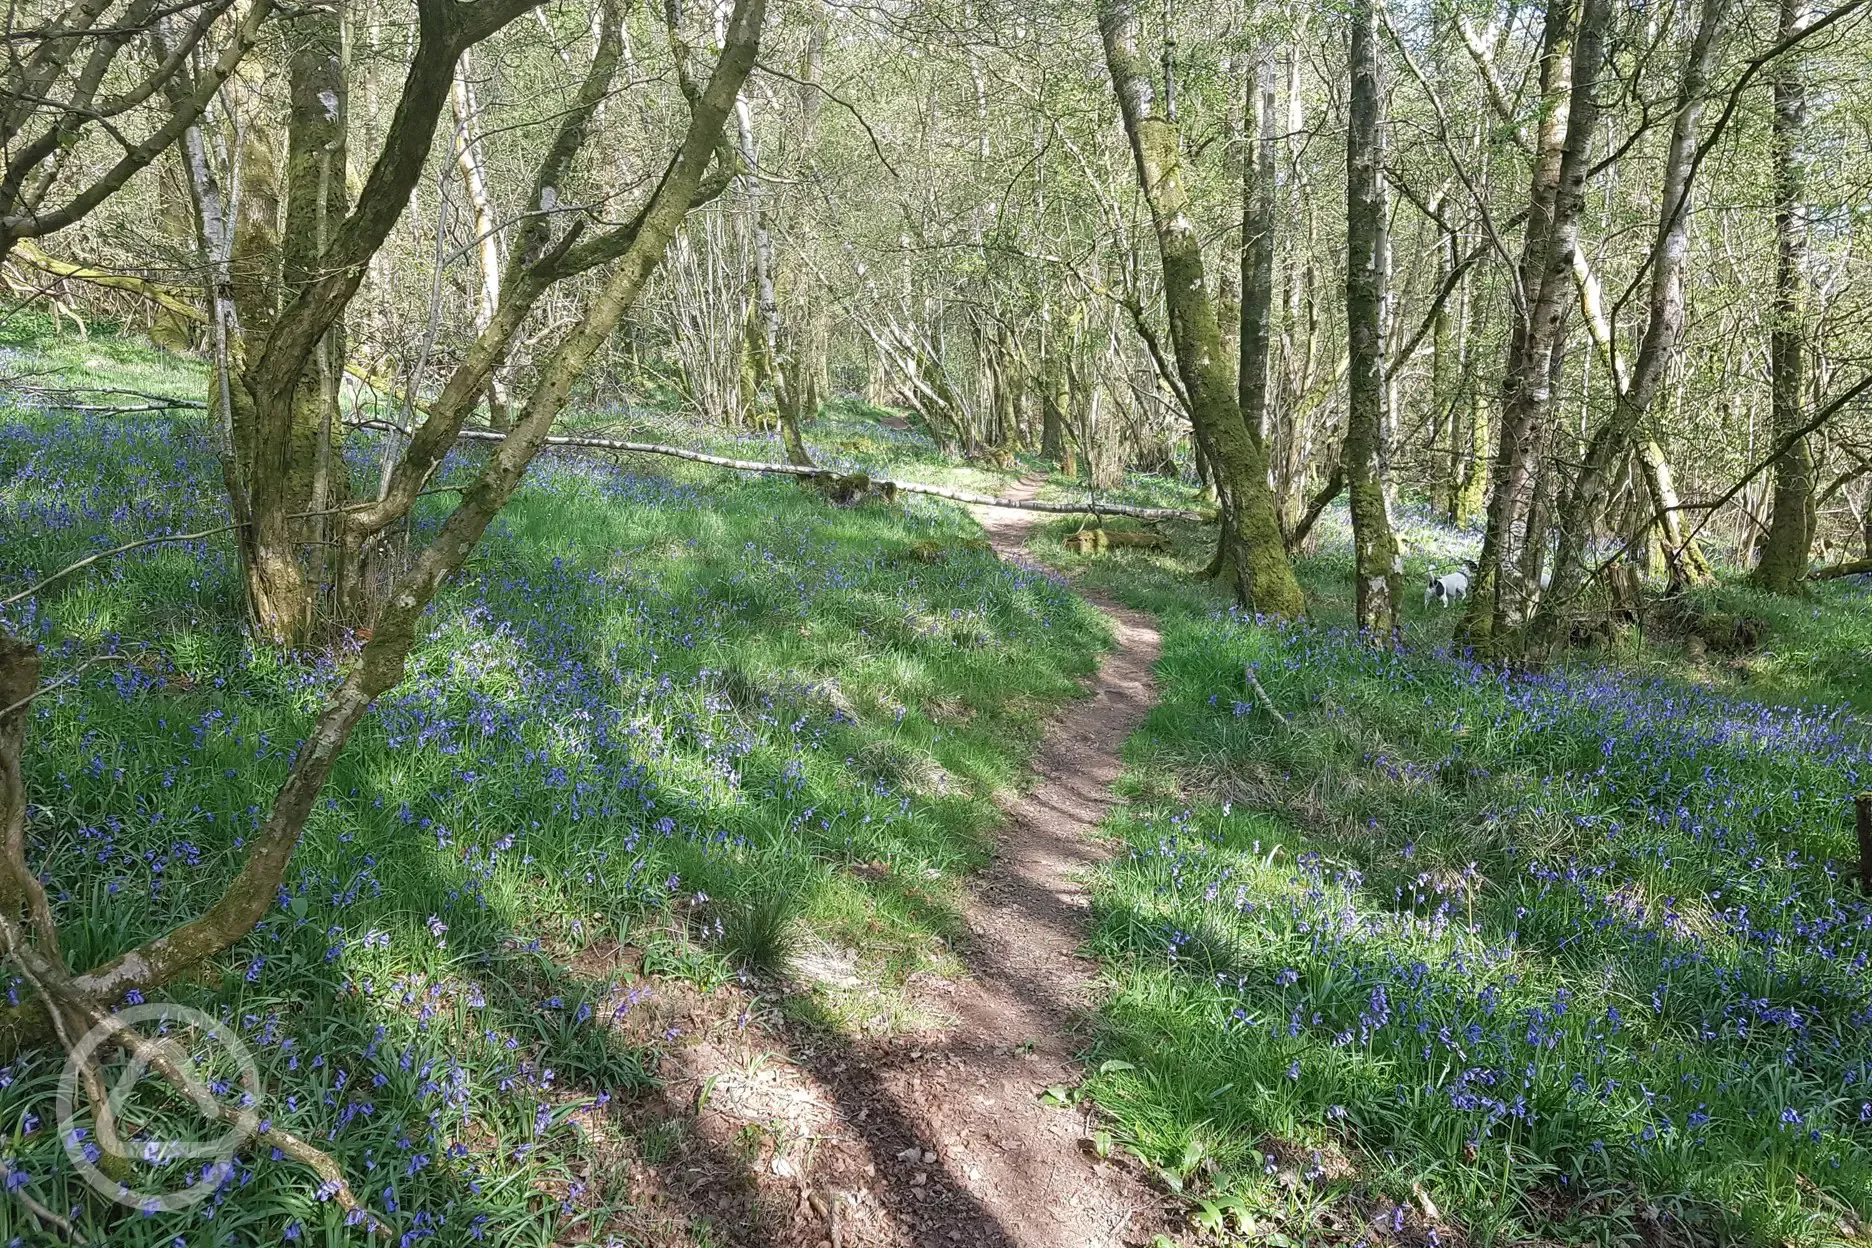 Nearby forest walk. Bluebells in May